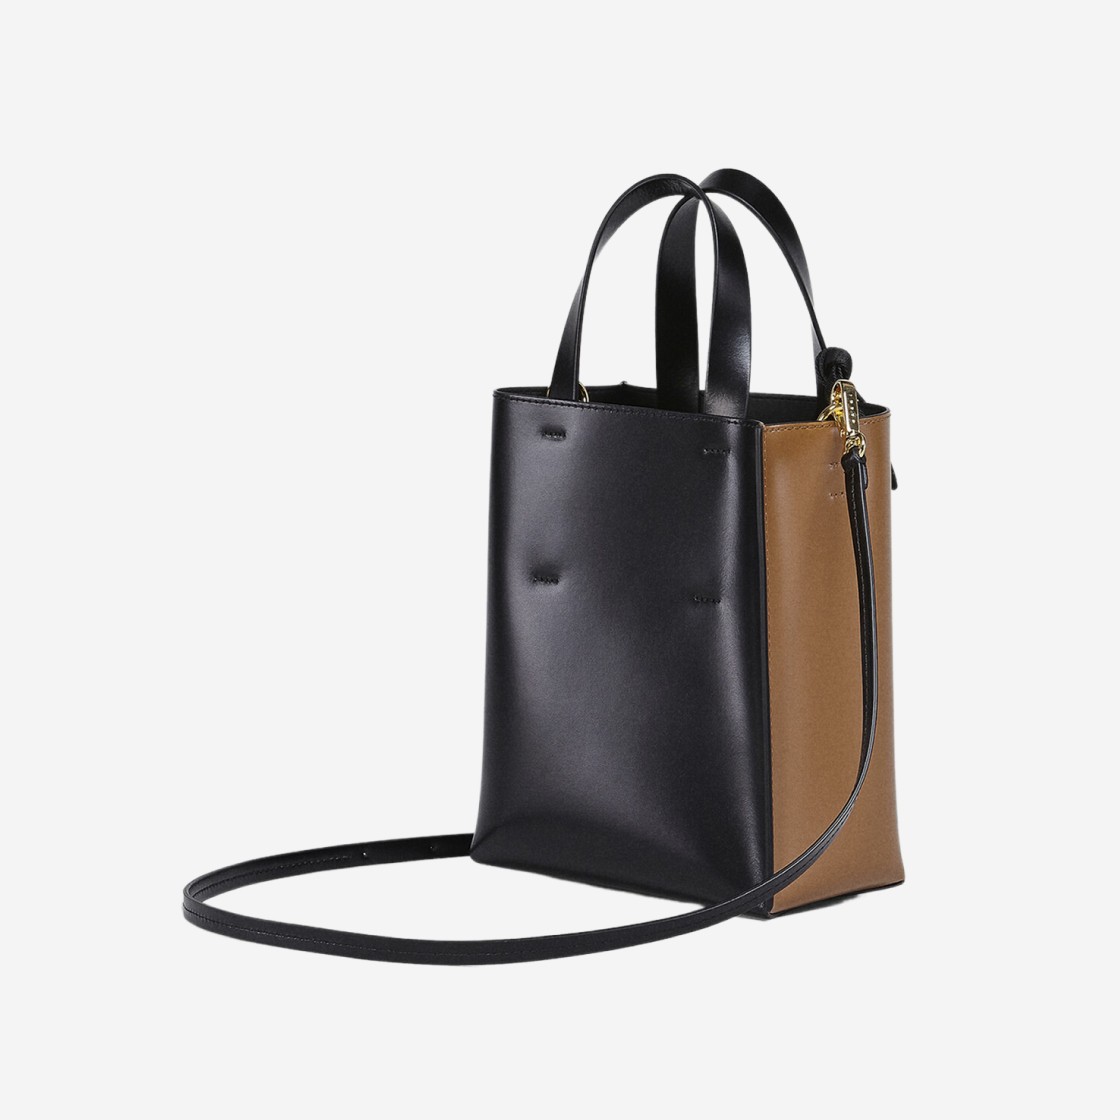 MUSEO small bag in brown and black leather